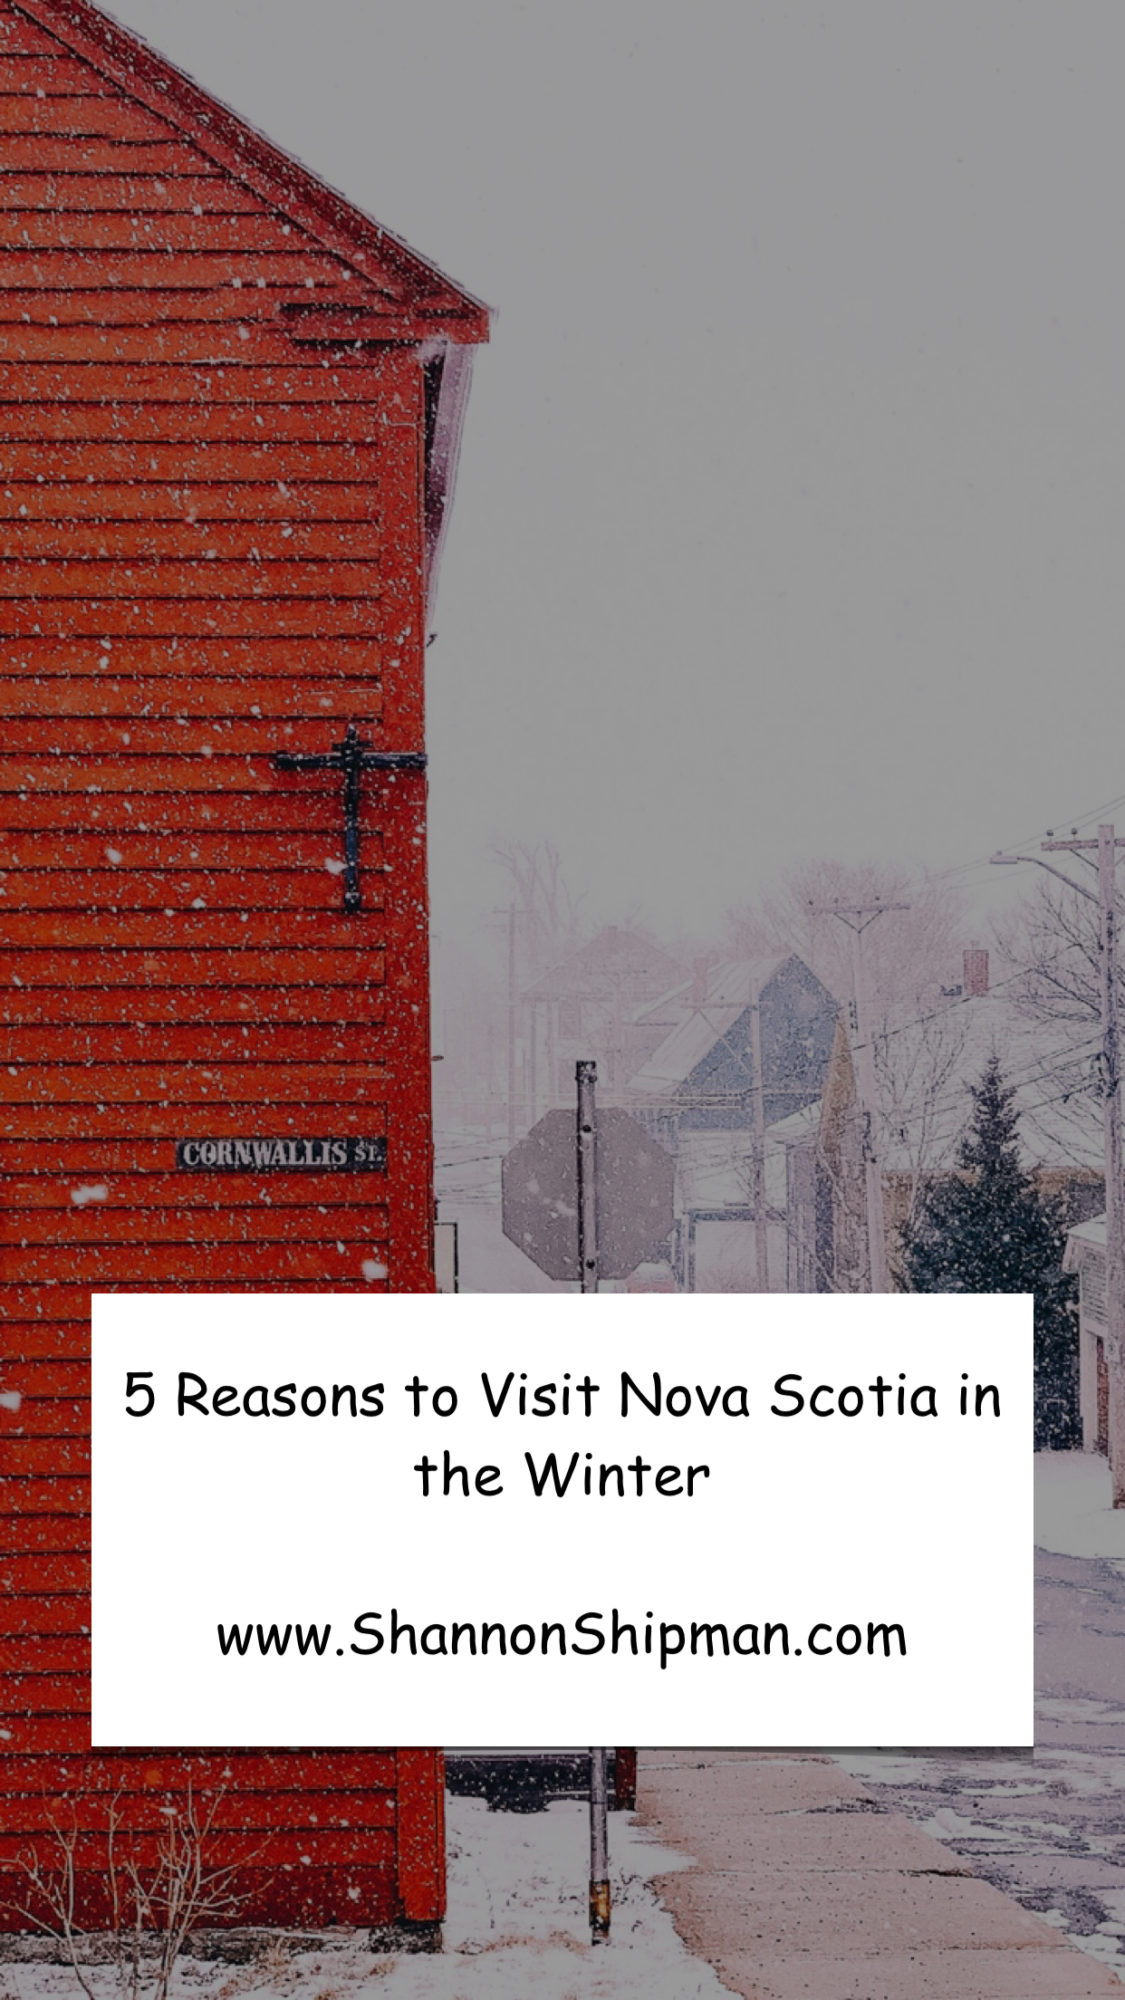 5 Reasons to Visit Nova Scotia in the Winter